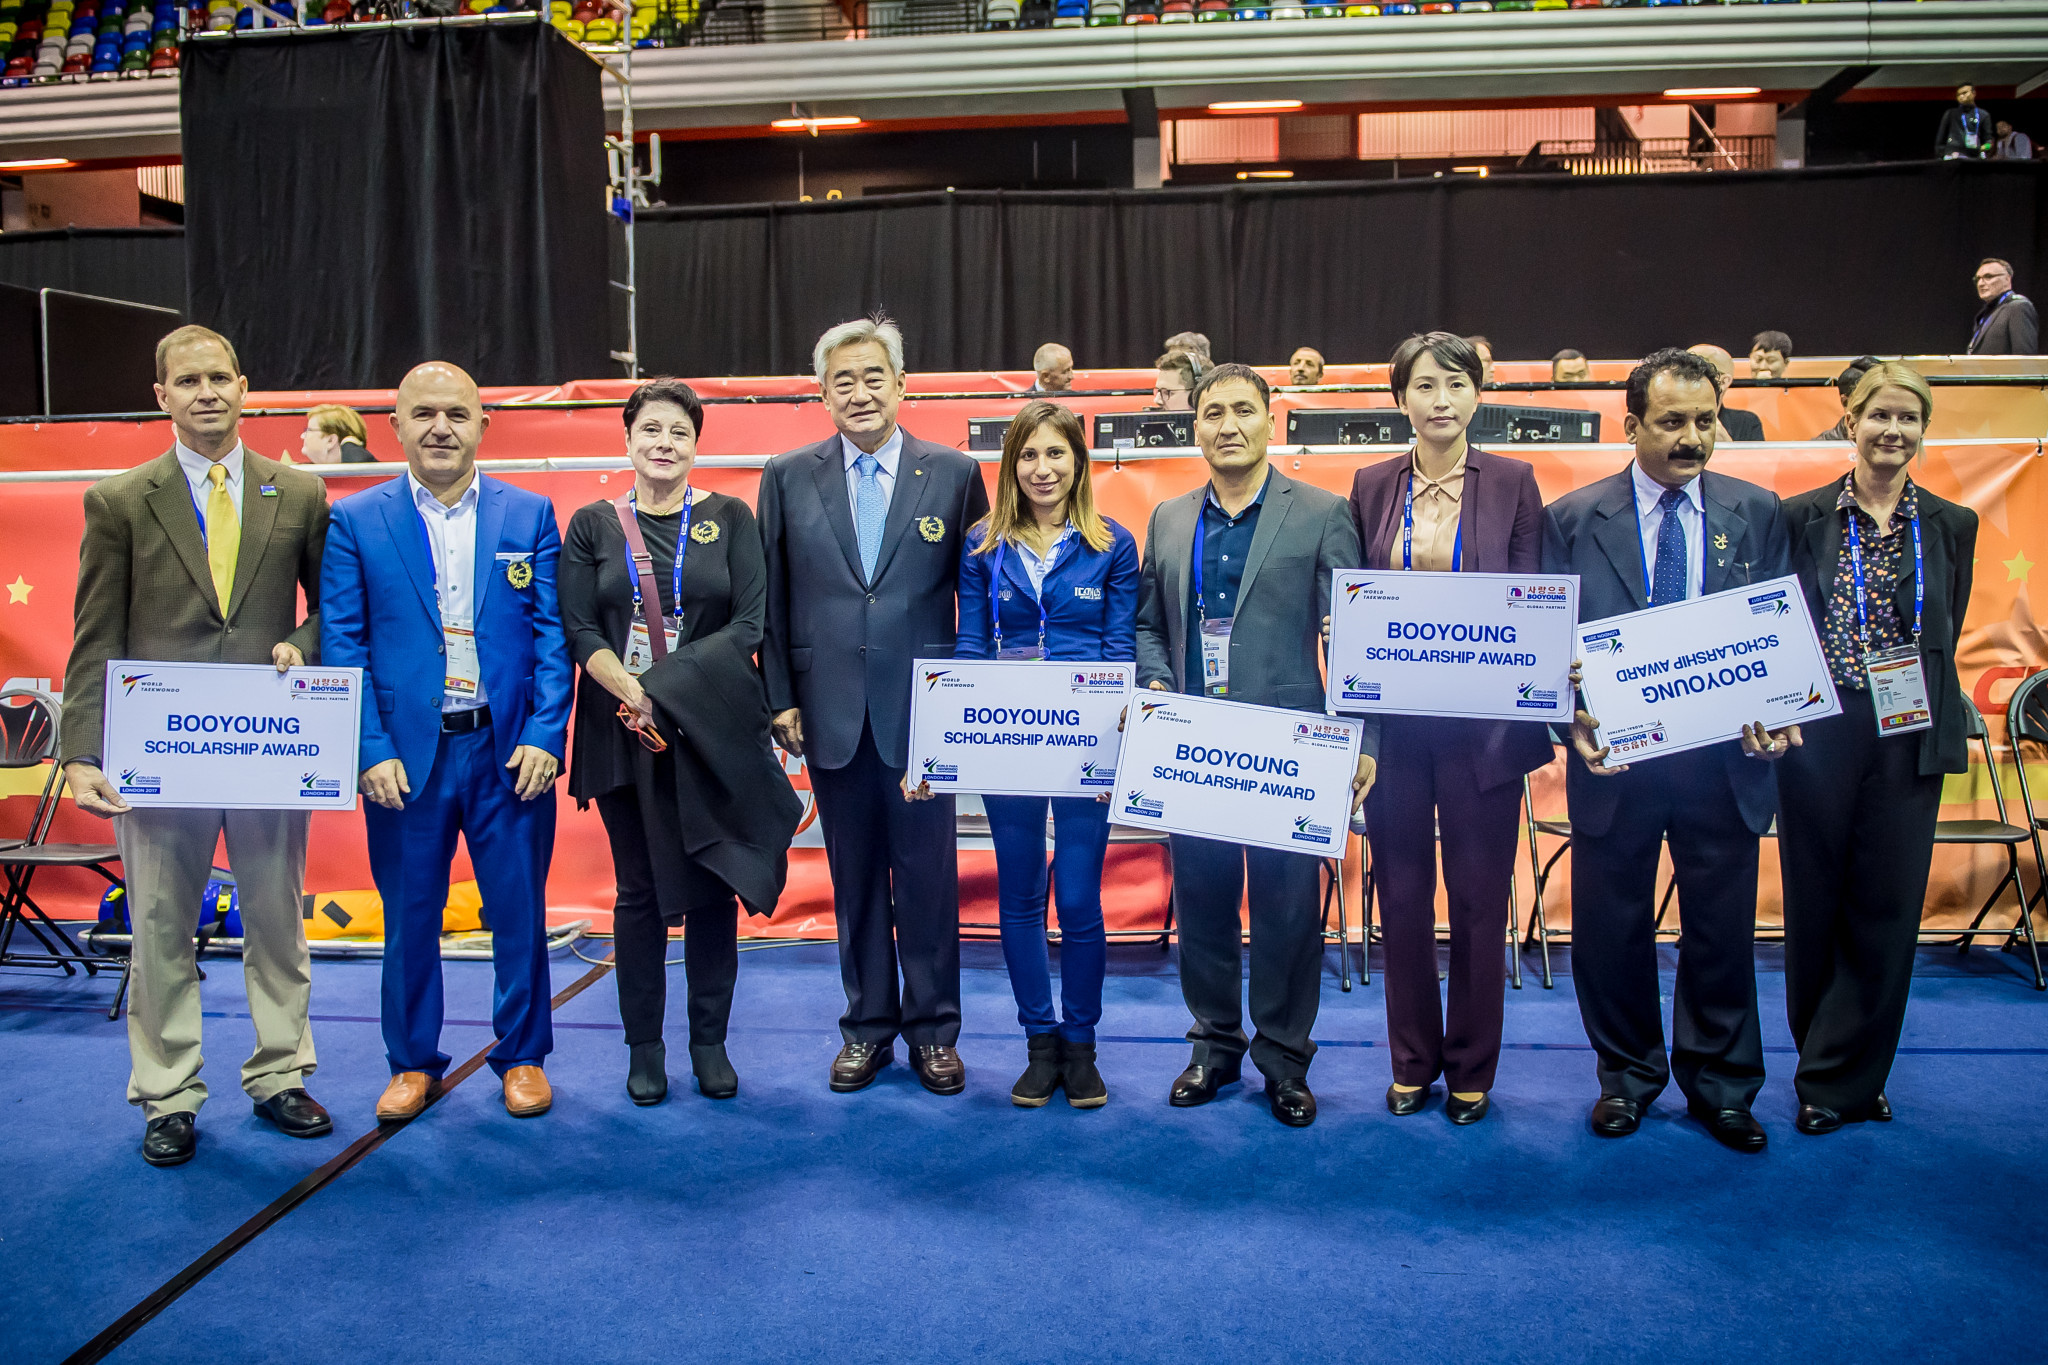 A number of countries were given a Booyoung Scholarship Award ©World Taekwondo